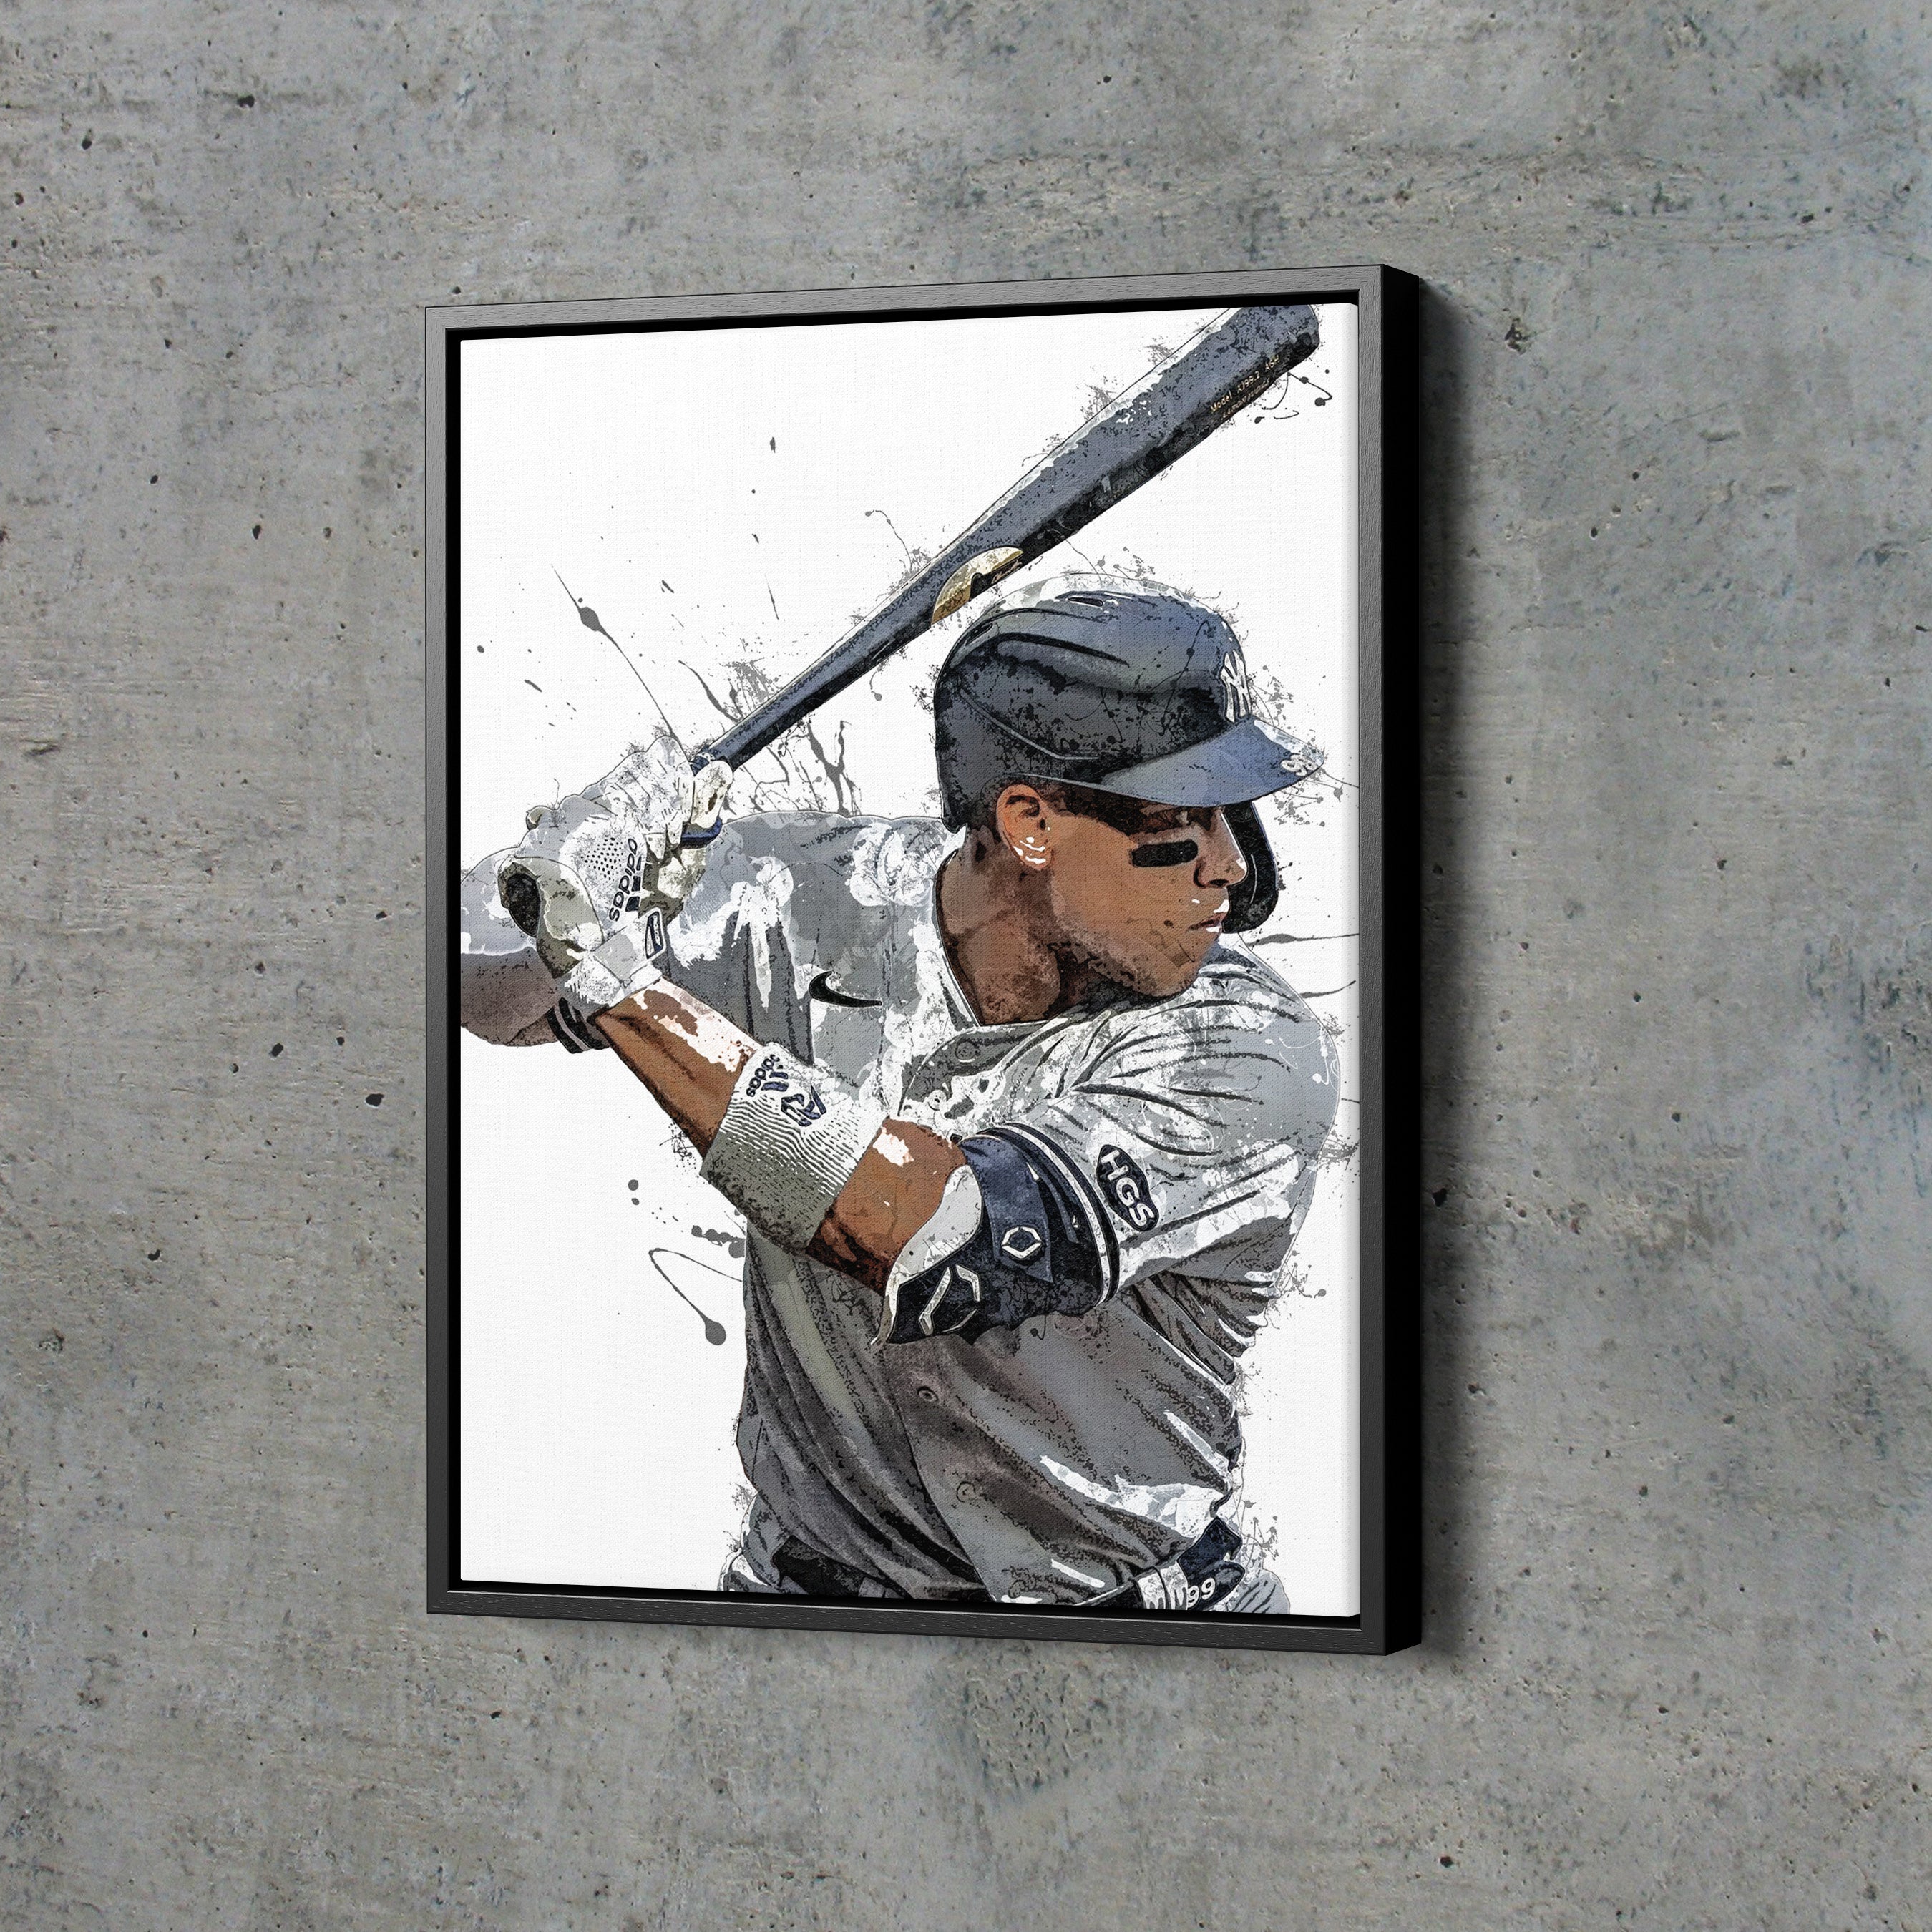  Aaron Judge Baseball Player Poster 18 Wall Art Poster Scroll  Canvas Painting Picture Living Room Decor Home Framed/Unframed  08x12inch(20x30cm): Posters & Prints